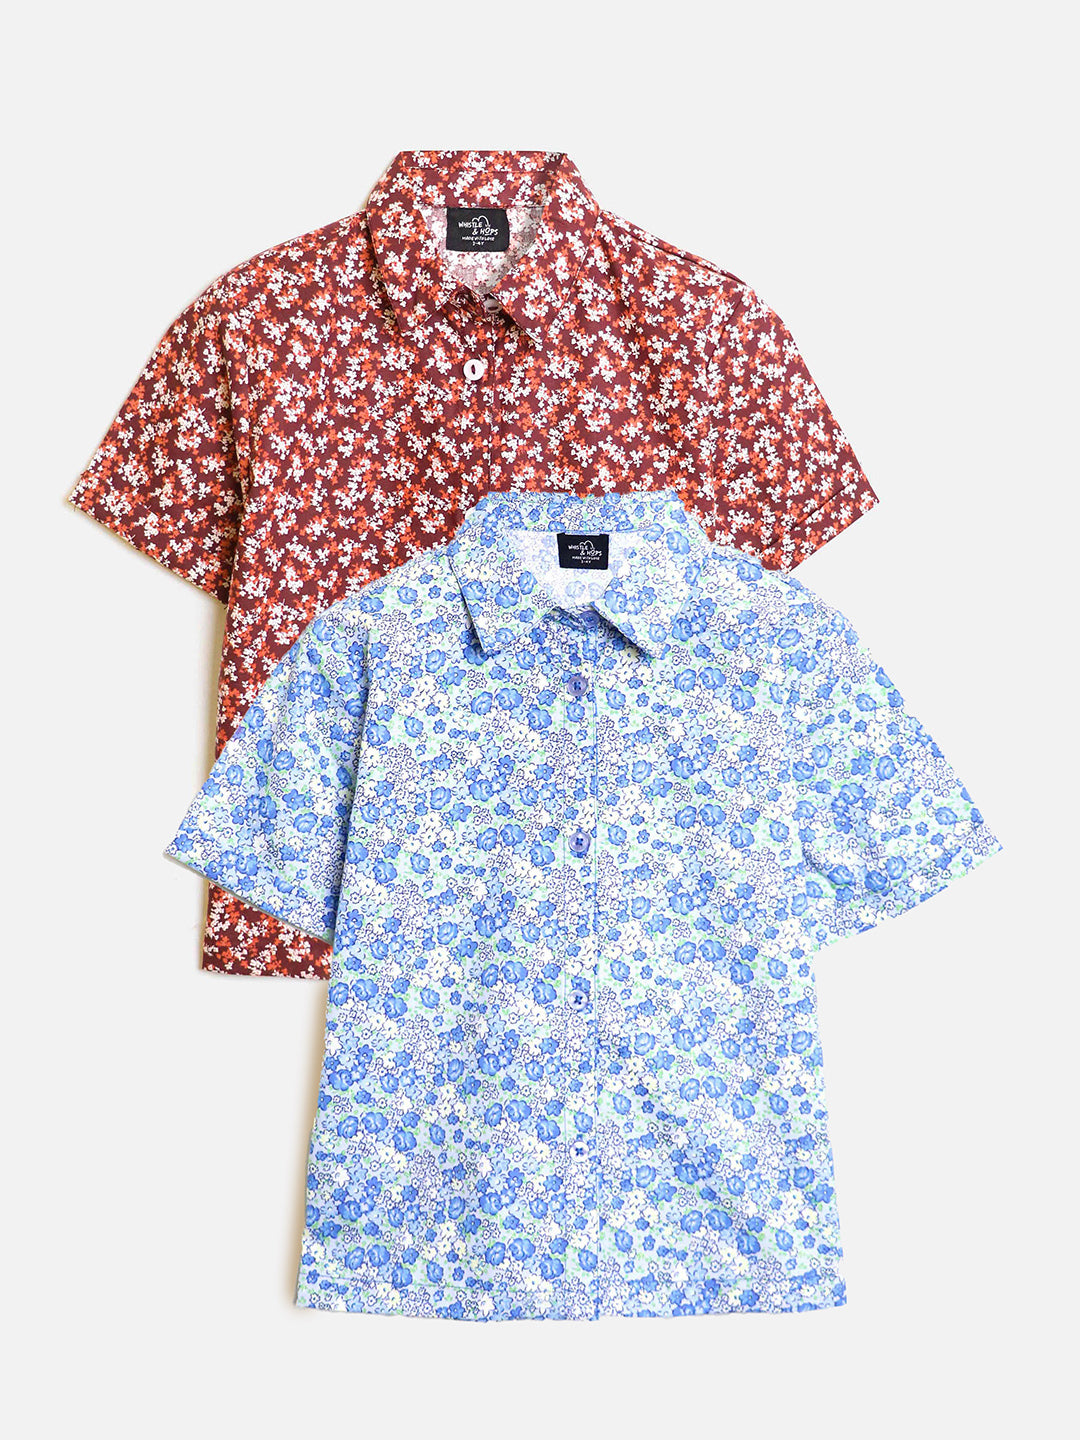 Boys Cotton Shirts Combo- Blue and Brown